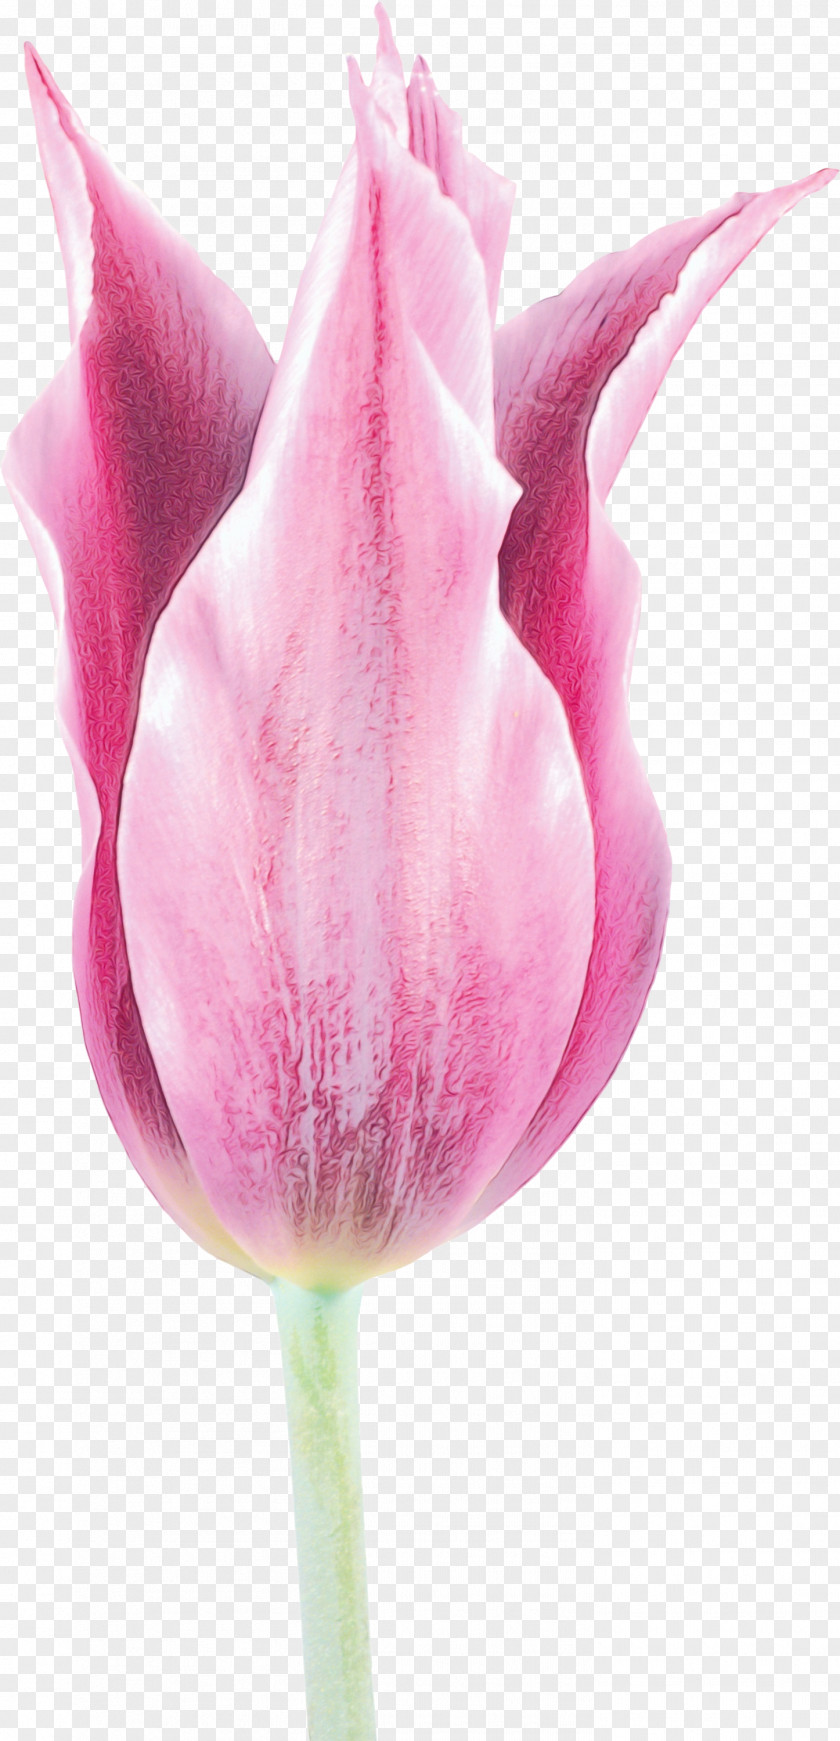 Lily Family Bud Pink Petal Tulip Flower Plant PNG